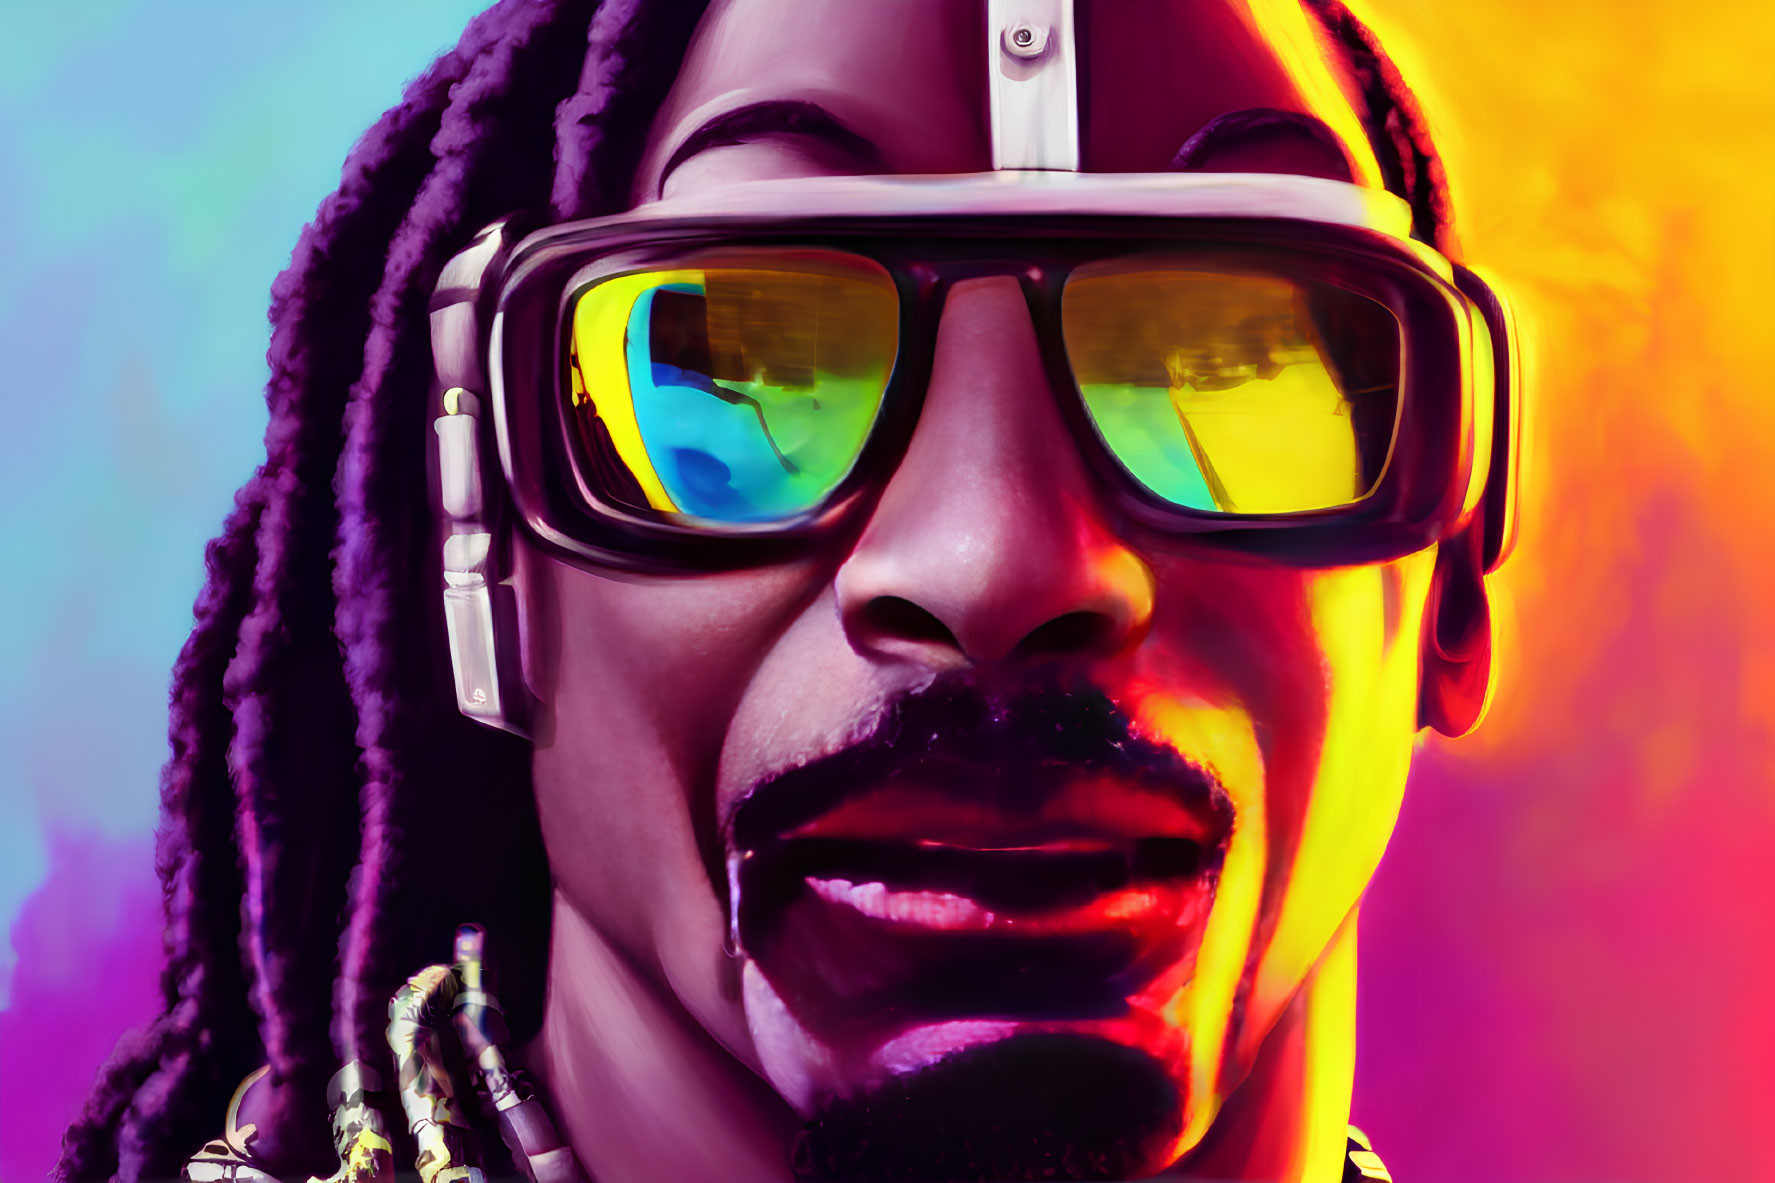 Smiling person with colorful dreadlocks and sunglasses on vibrant background